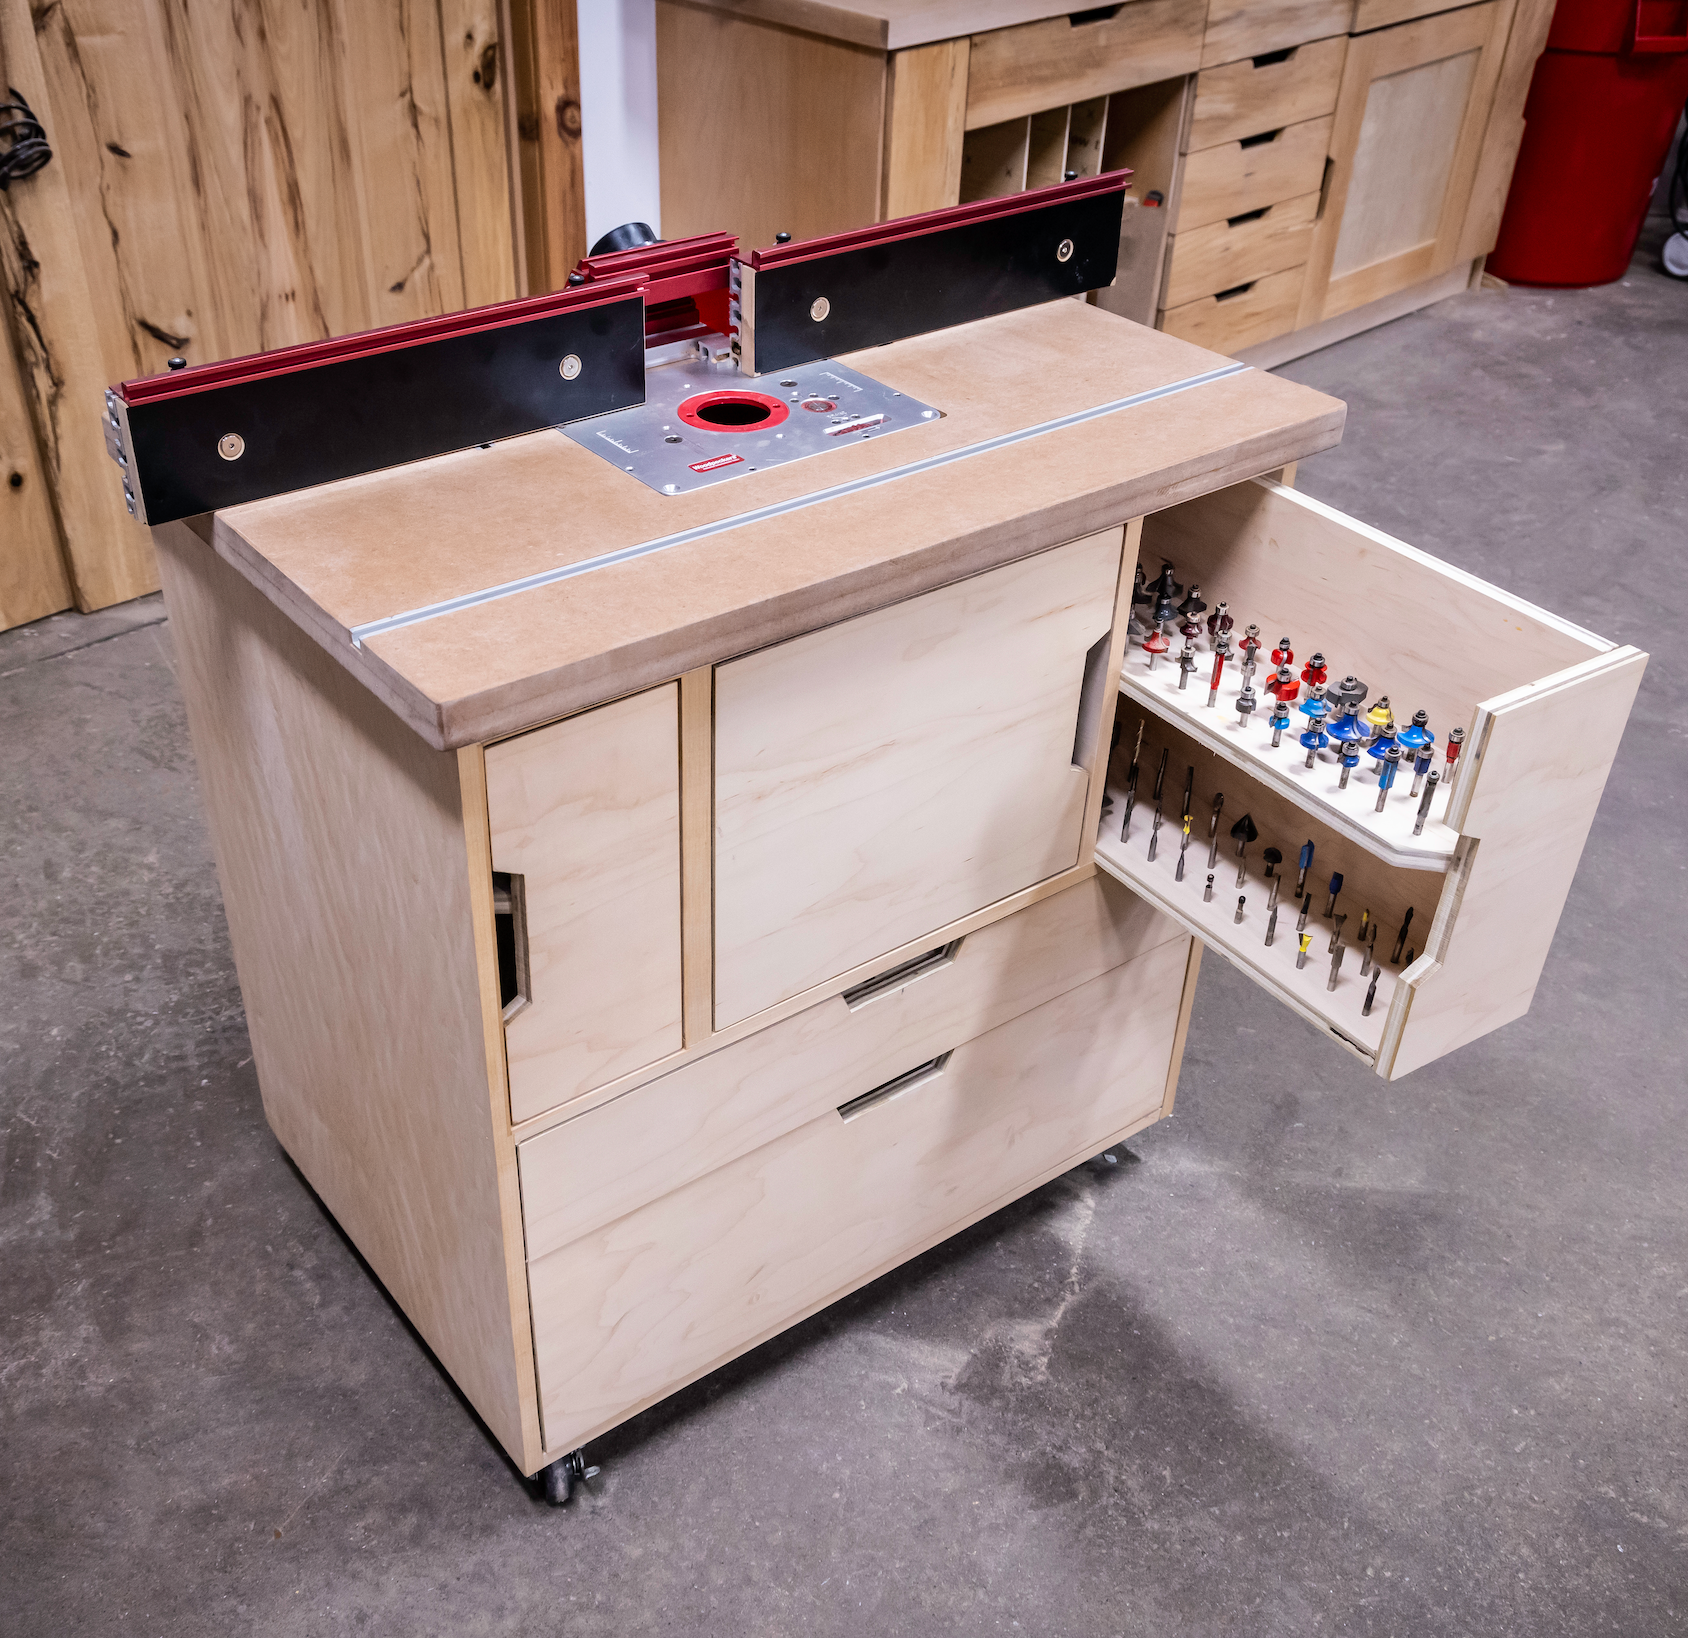 Basic Woodworking Router Table Plan